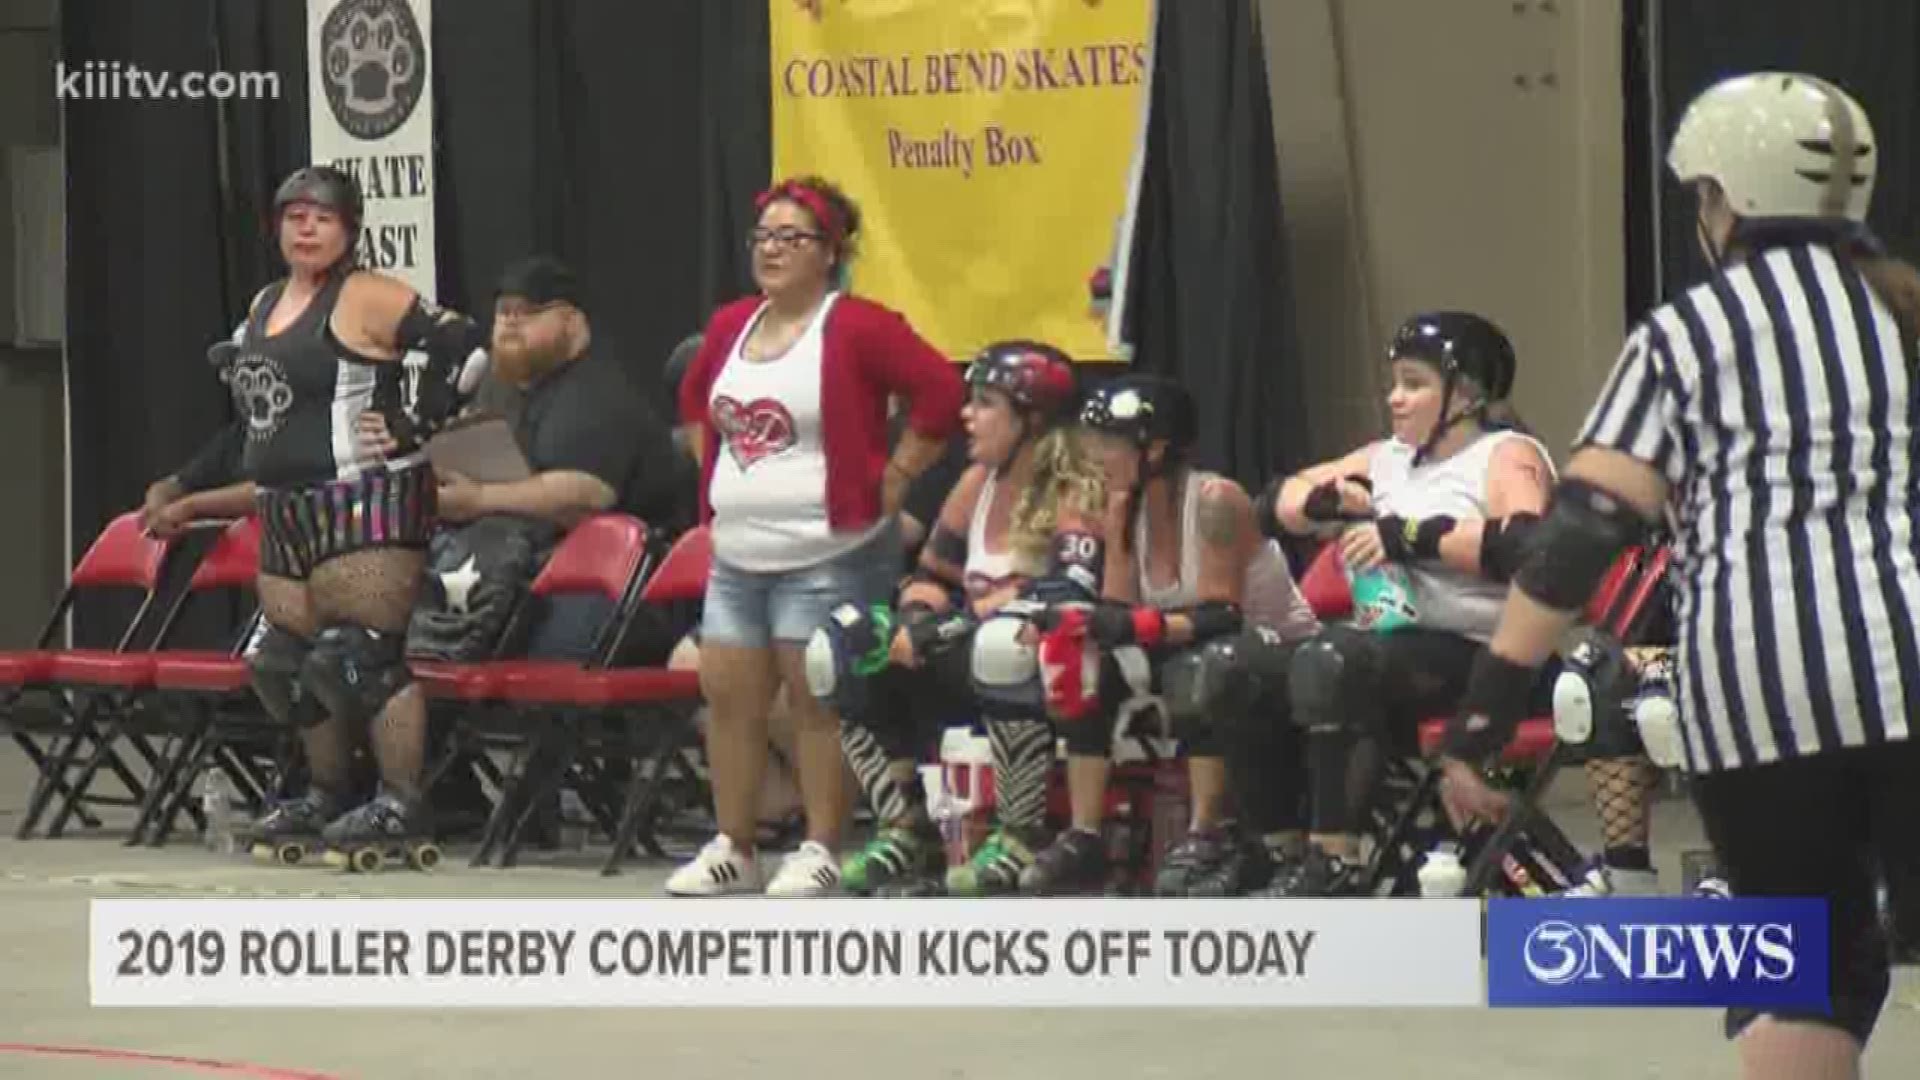 Roller Derby is an indoor contact sport played on a flat track by two teams of five members roller skating.